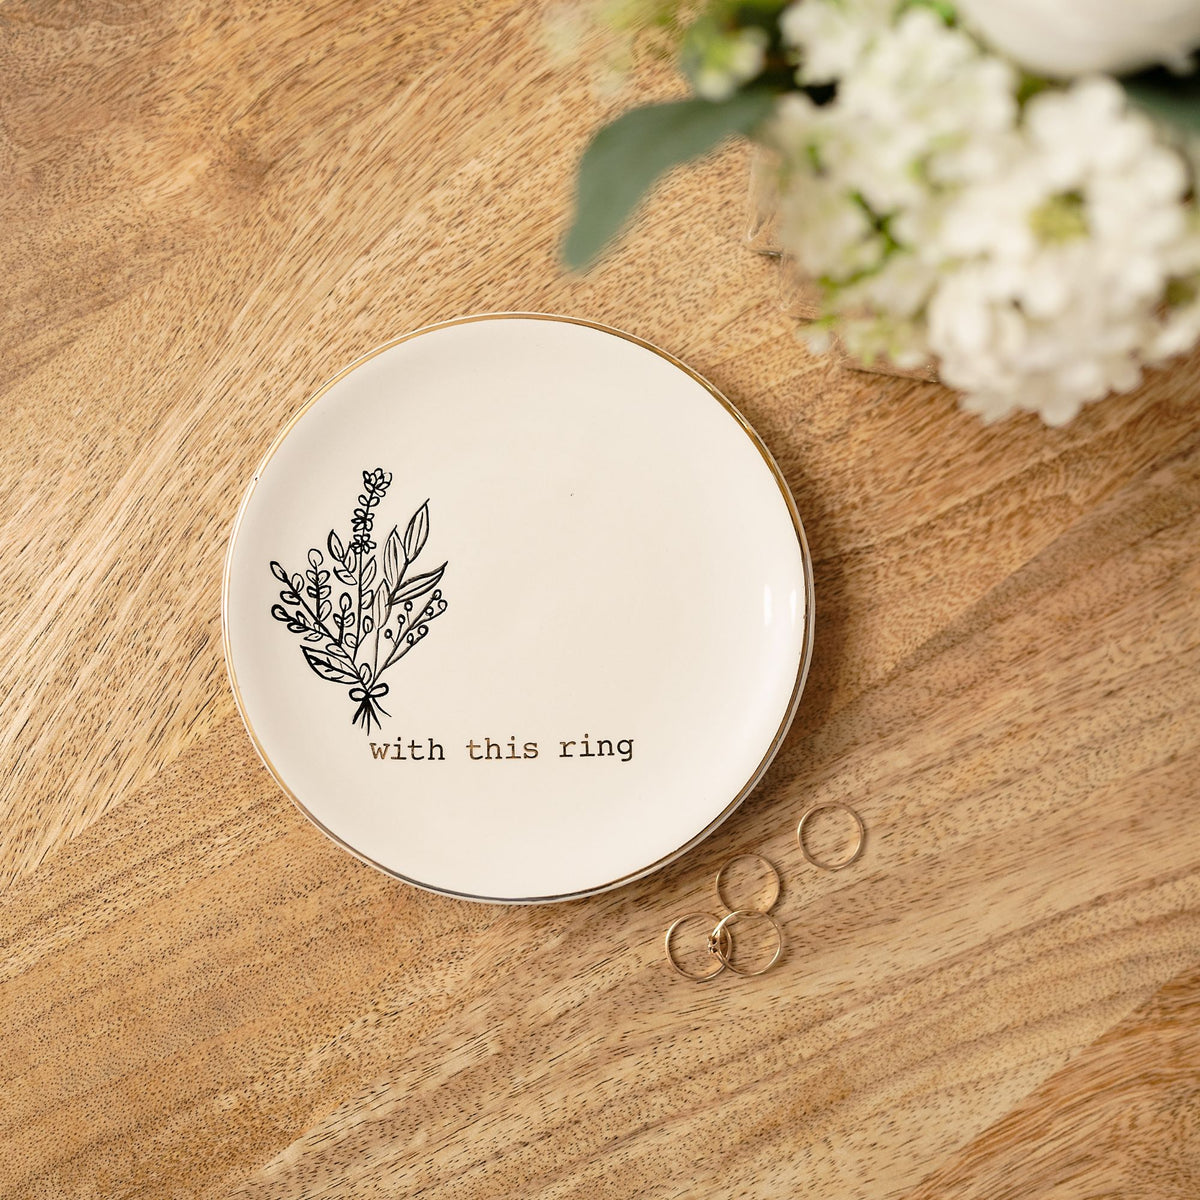 Elegant White & Gold Ring Dish for Newlyweds & Married Couples – GLORY HAUS